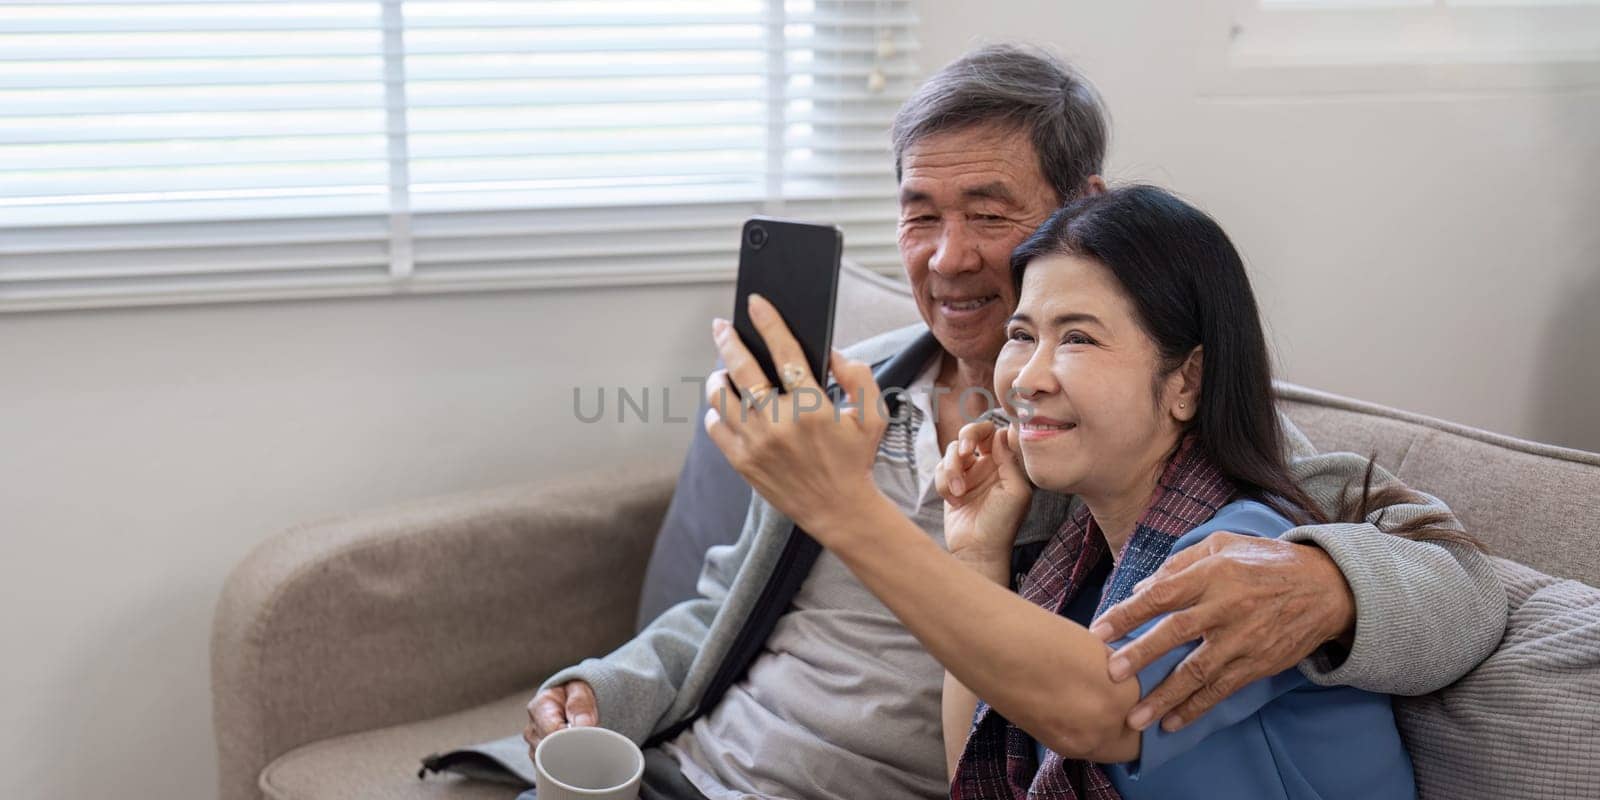 An elderly couple taking a selfie together at home, showcasing their love and companionship in a cozy living room setting.